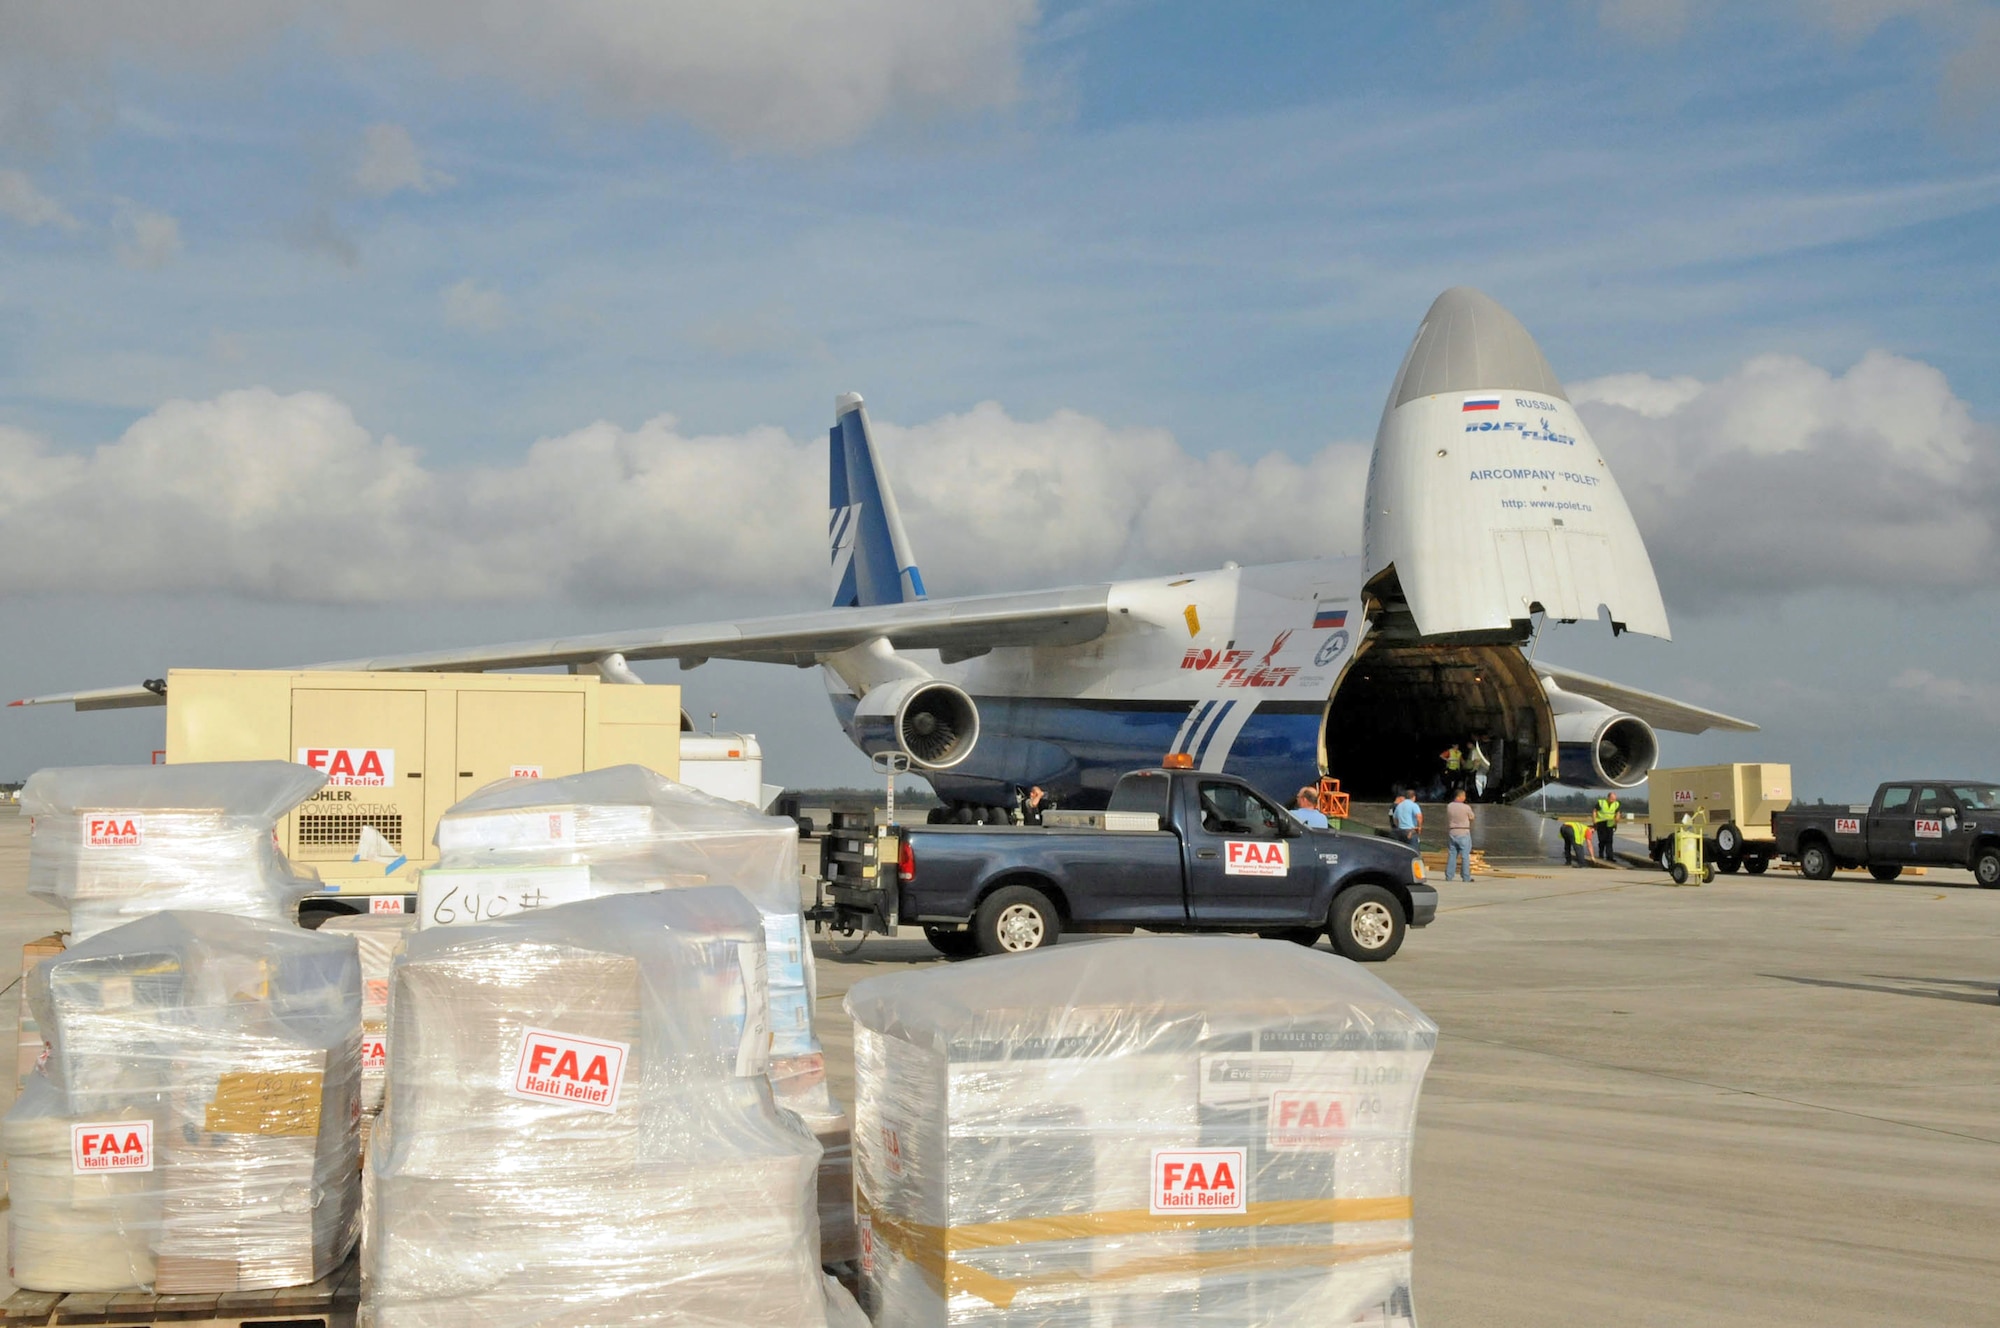 Members of the Federal Aviation Administration load a mobile air traffic control tower, generators, food, clothing and water aboard a Russian Antonov An-124 cargo plane en route to Haiti. The tower will be used to help improve the efficiency of aircraft flying in and out of Haiti. The supplies will be used to support Operation Unified Response. (U.S. Air Force photo/Master Sgt. Sabrina Johnson) 